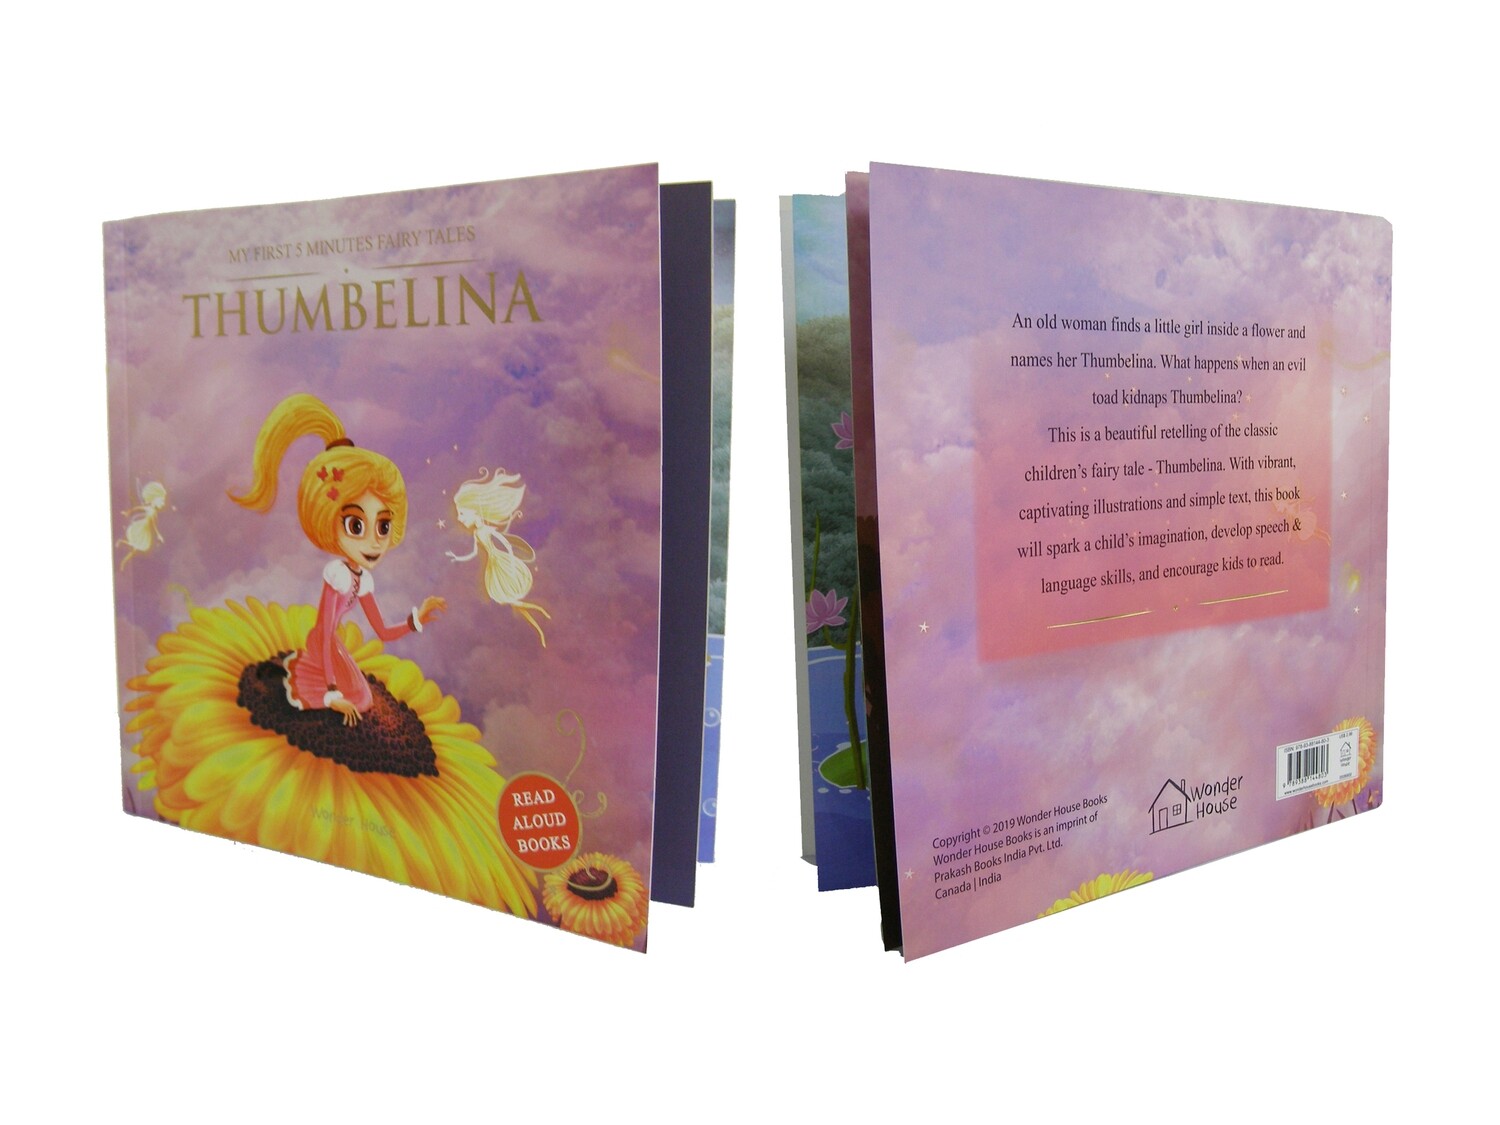 THUMBELINA - MY FIRST 5 MINUTES FAIRY TALES BOOK